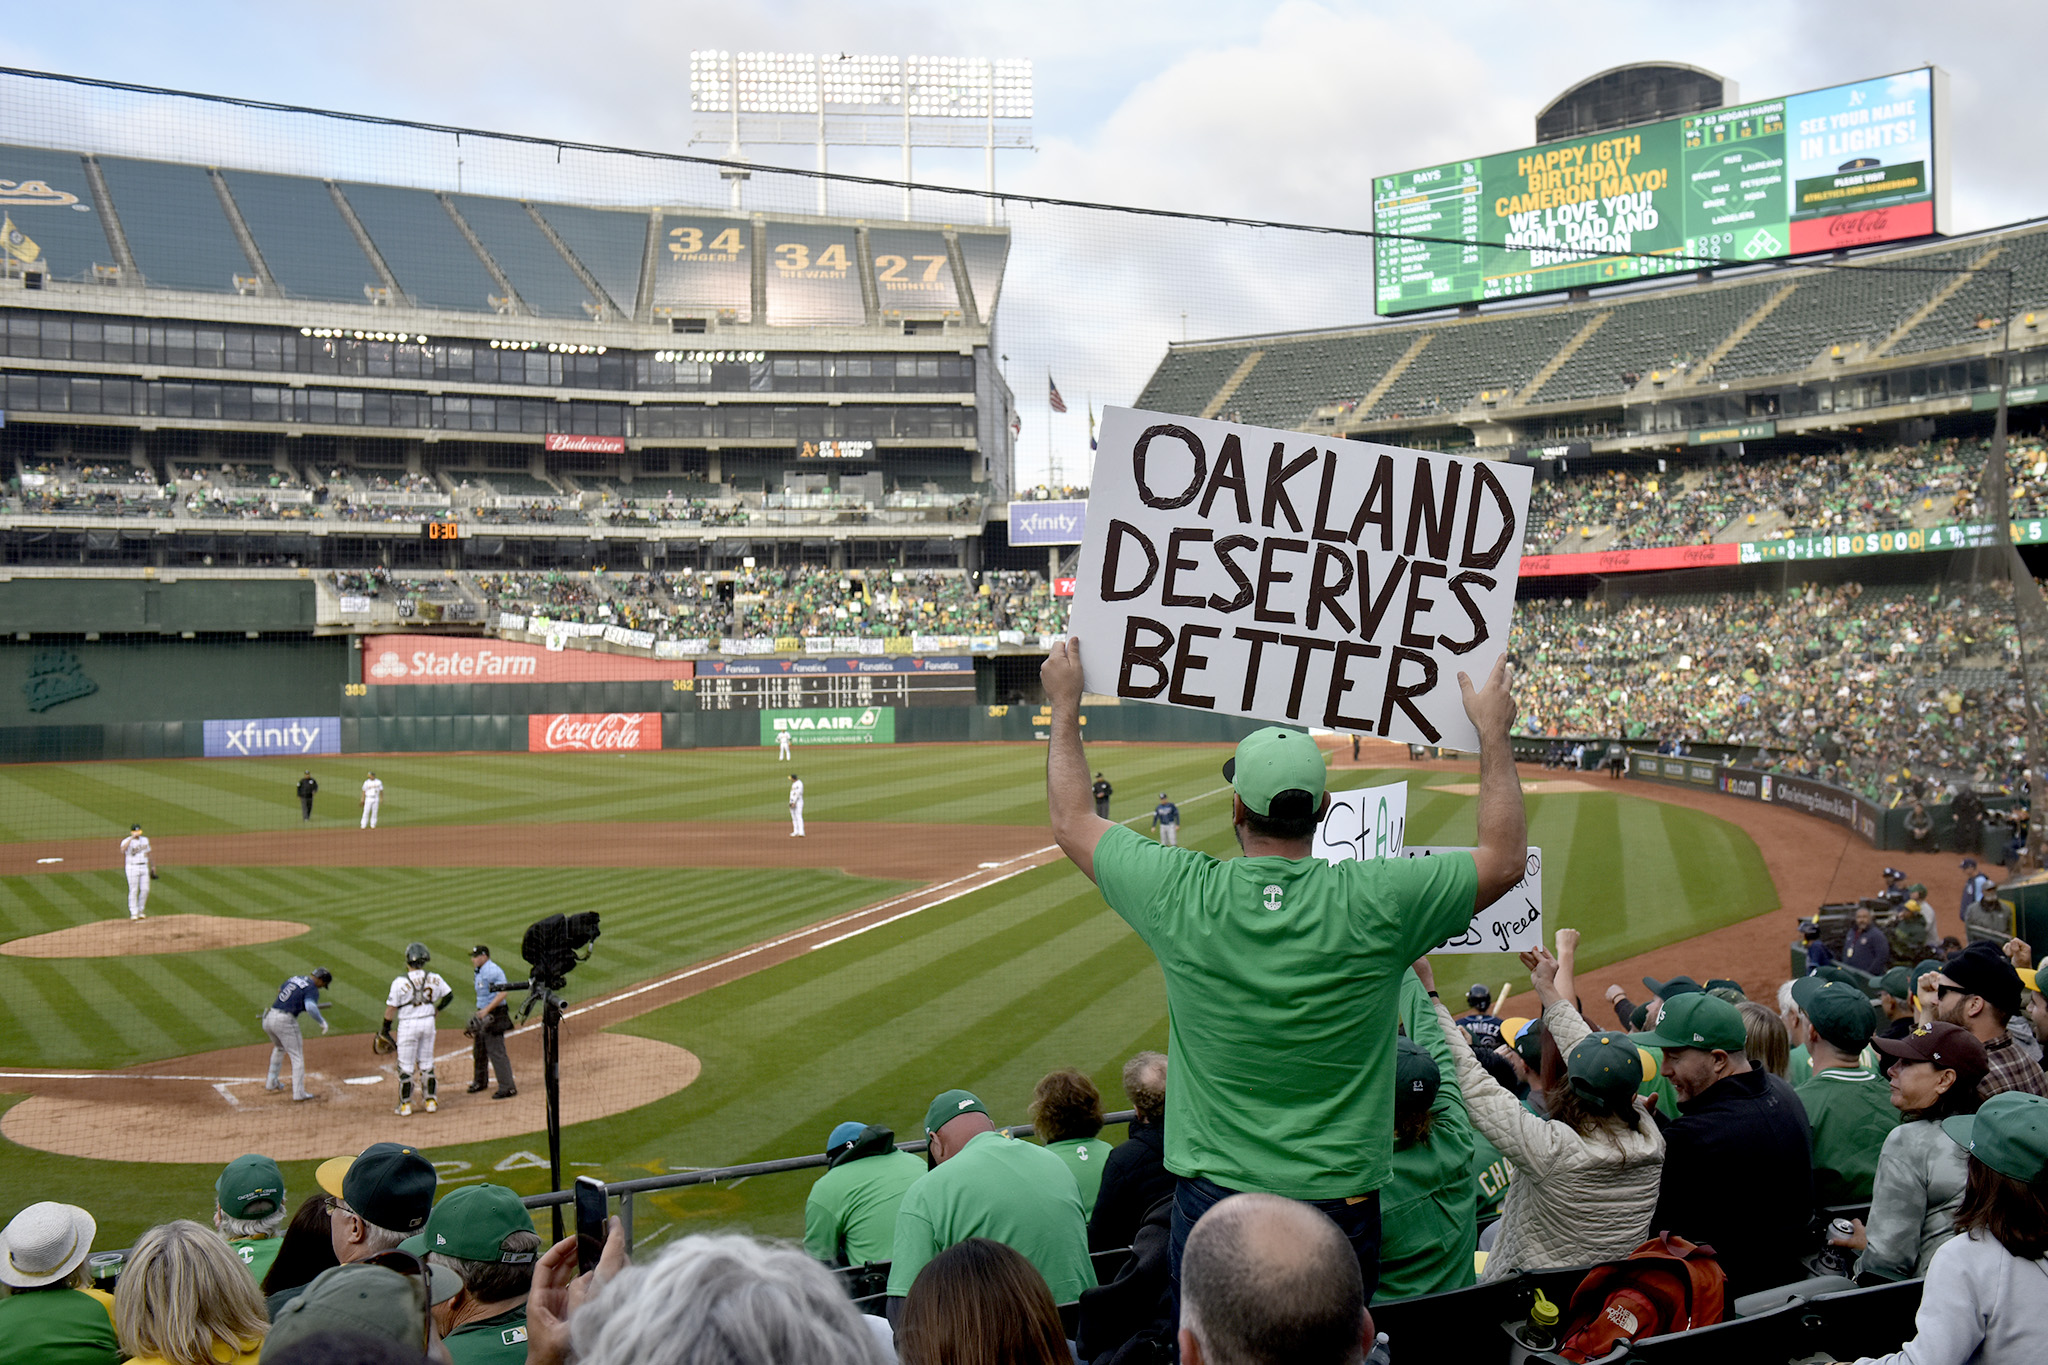 Sell the team': The wild A's fan 'reverse boycott' in photos